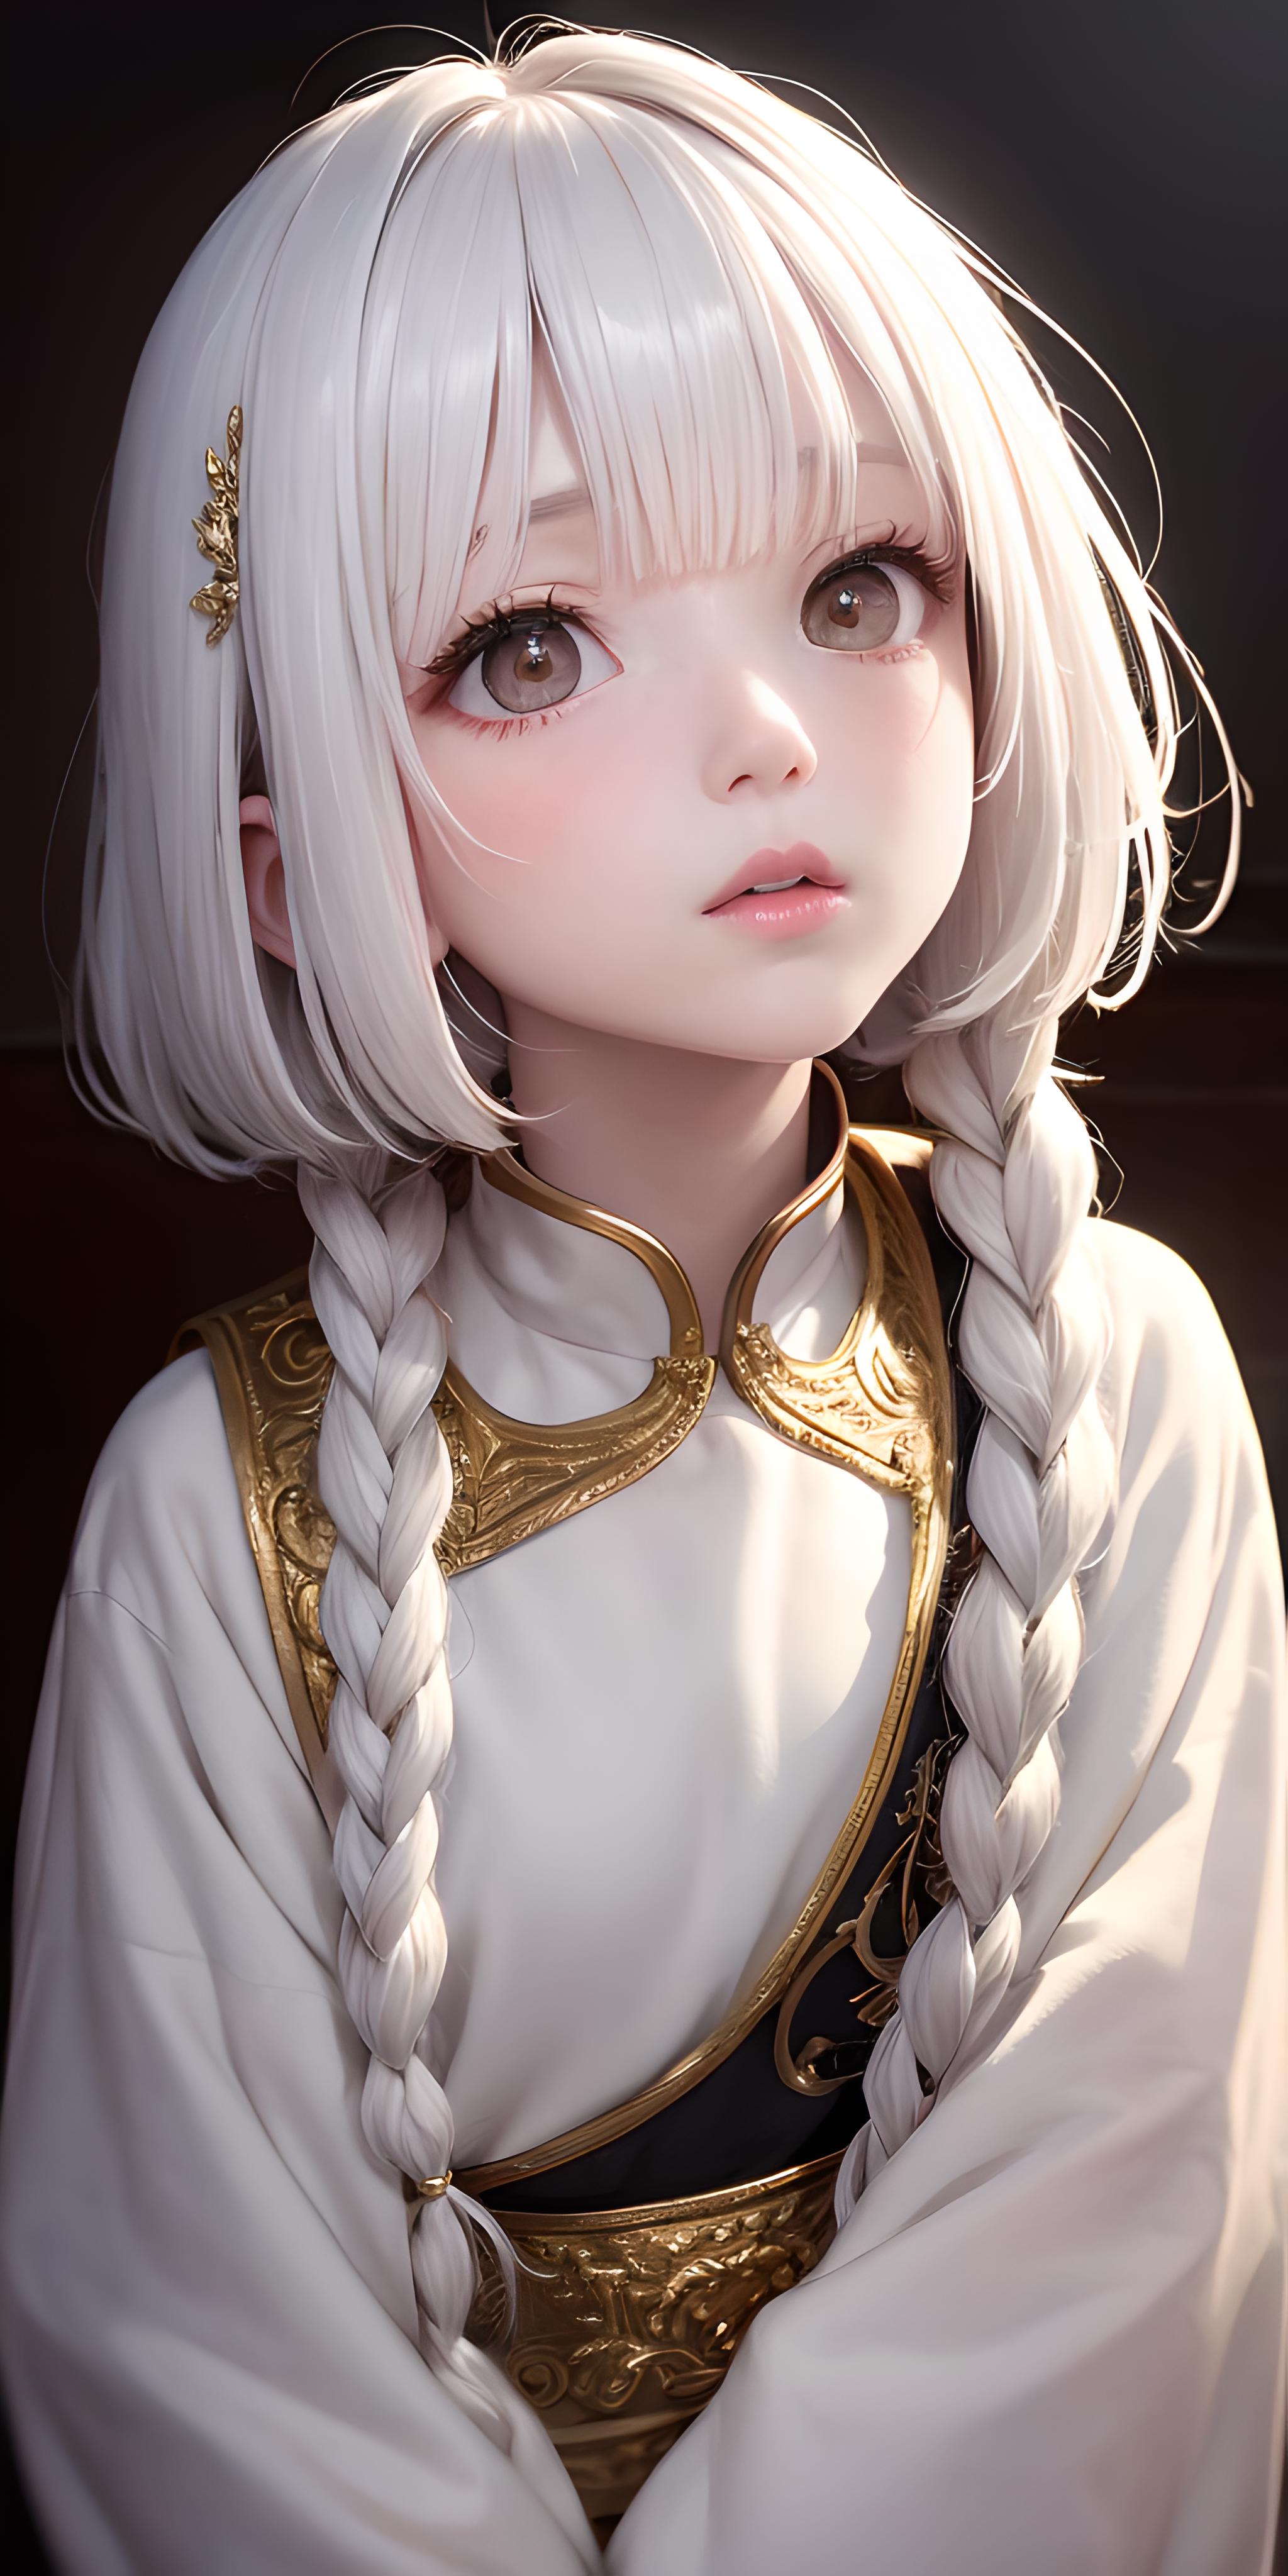 A white haired anime girl with braided pigtails and a white outfit.